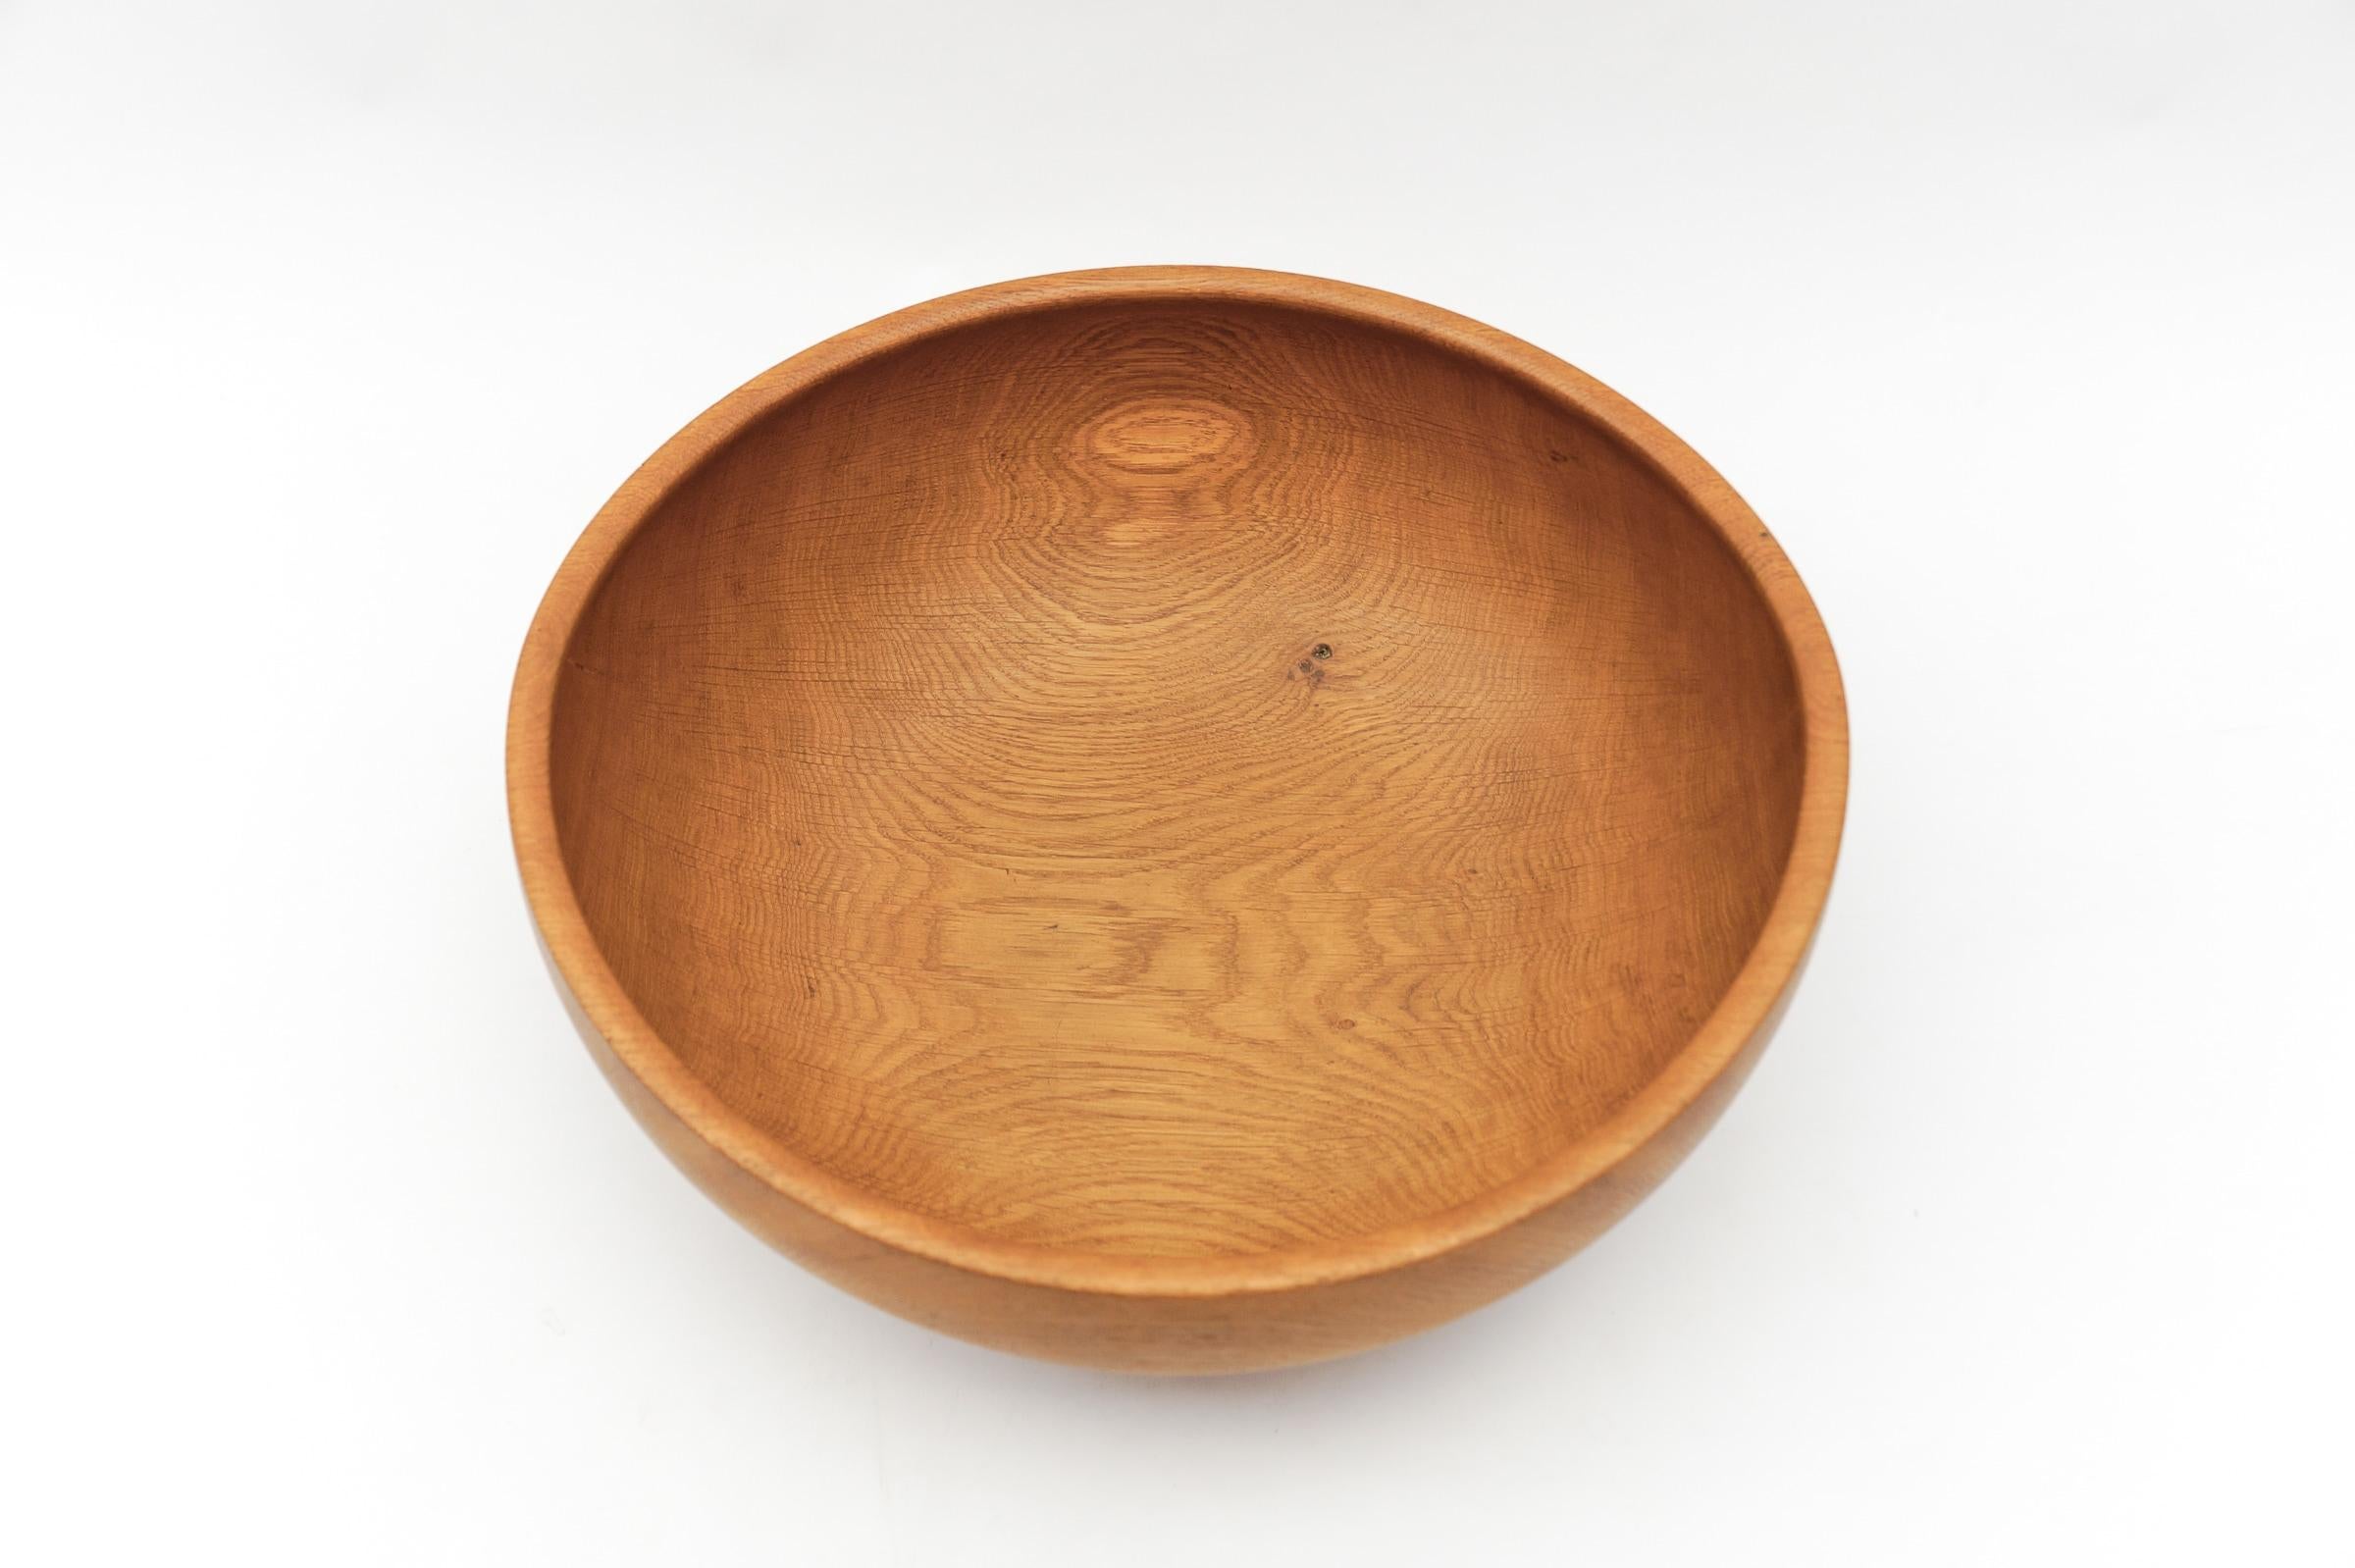 Awesome Huge Mid-Century Modern Oak Bowl by K. Weichselbaum, 1999 Germany For Sale 6